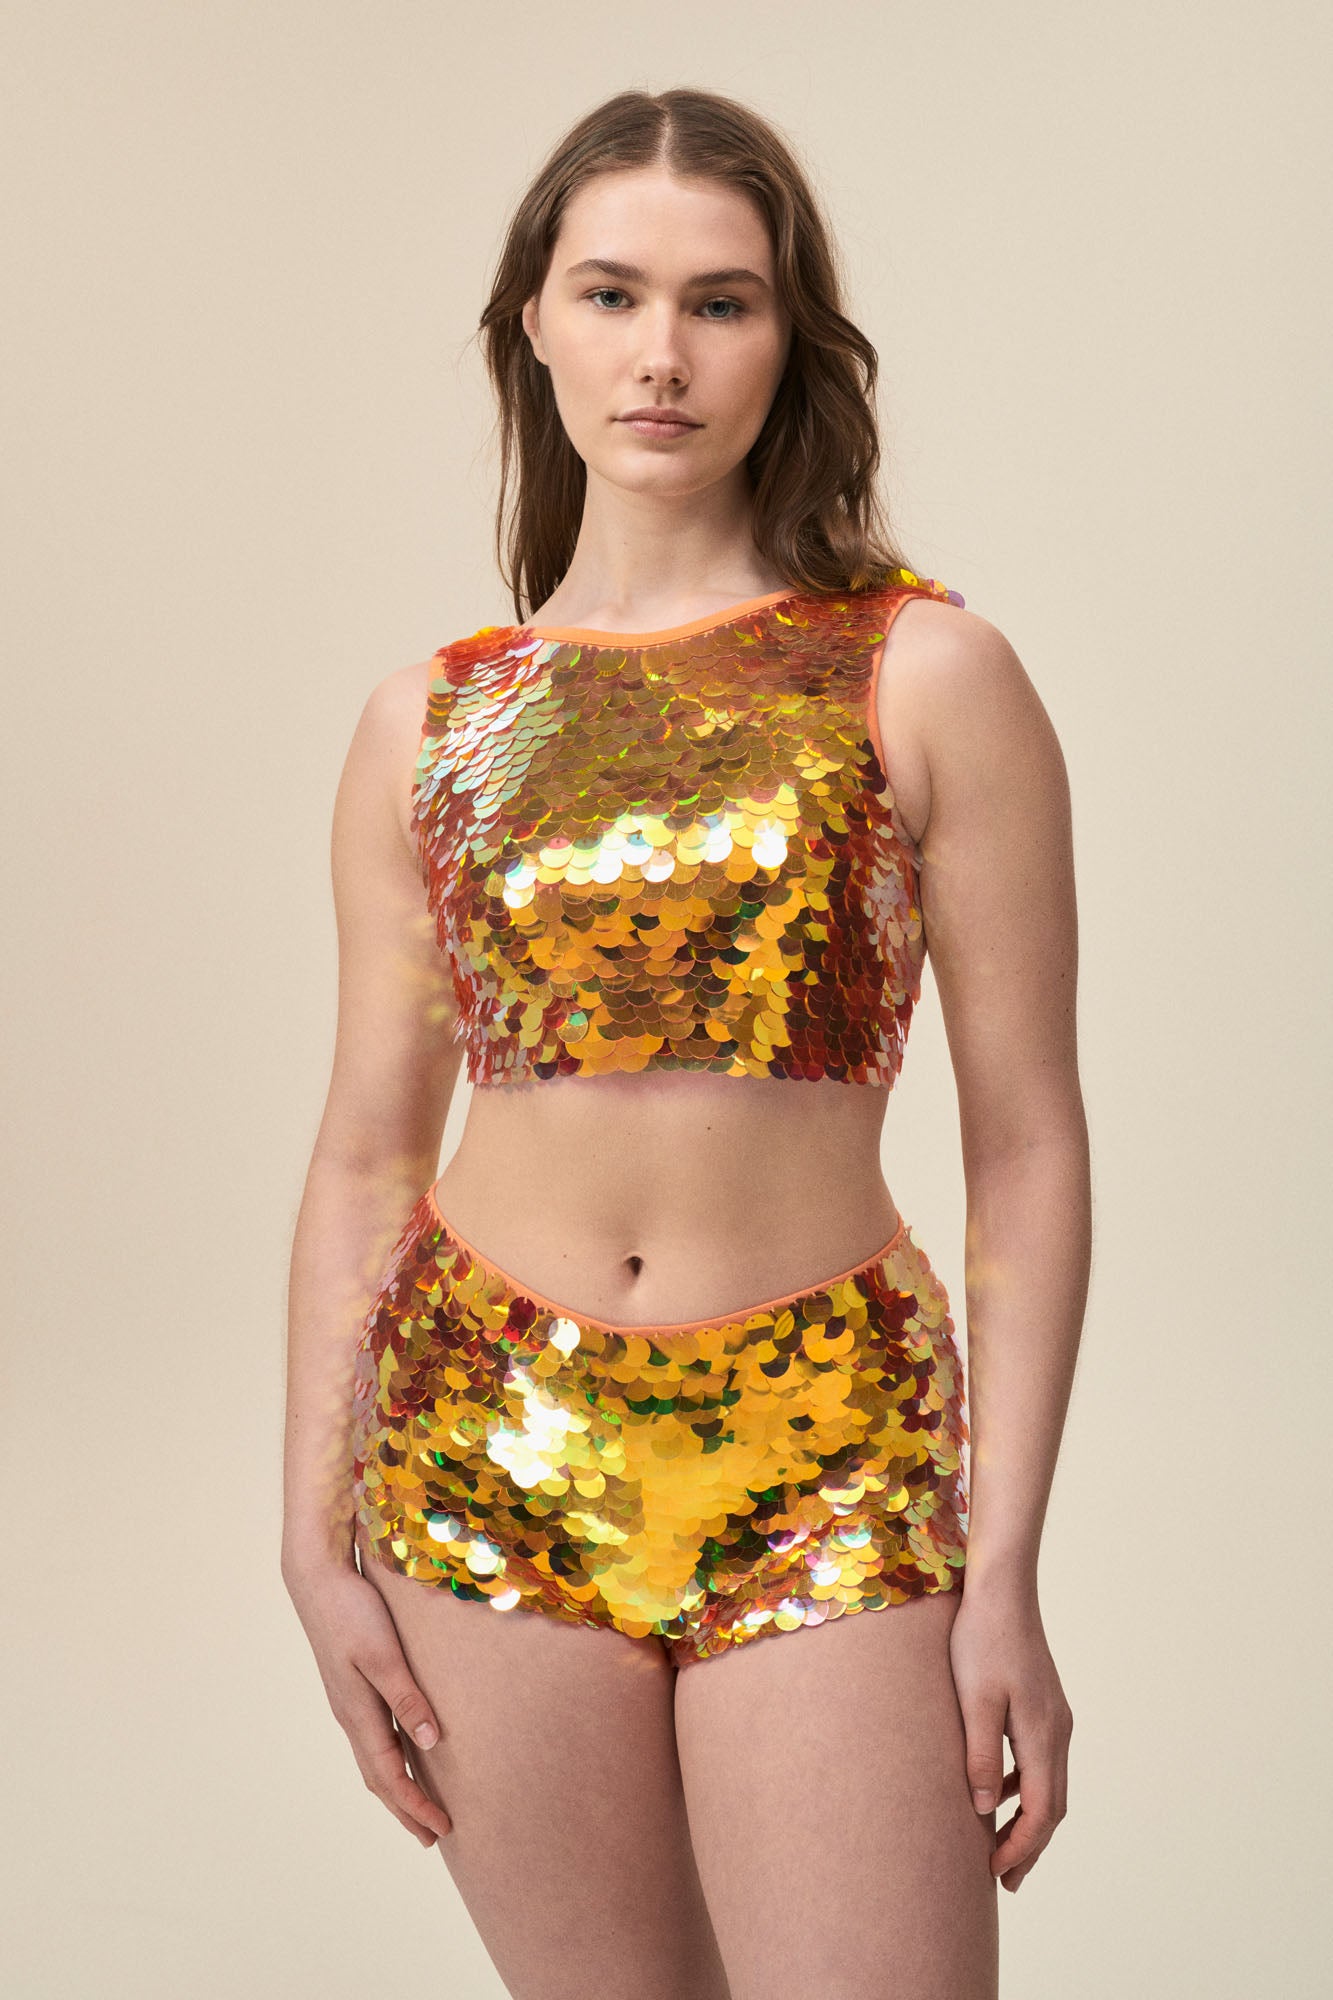 A woman faces you wearing stretchy Rosa Bloom Gigi hotpants with large sparkling orange sequins